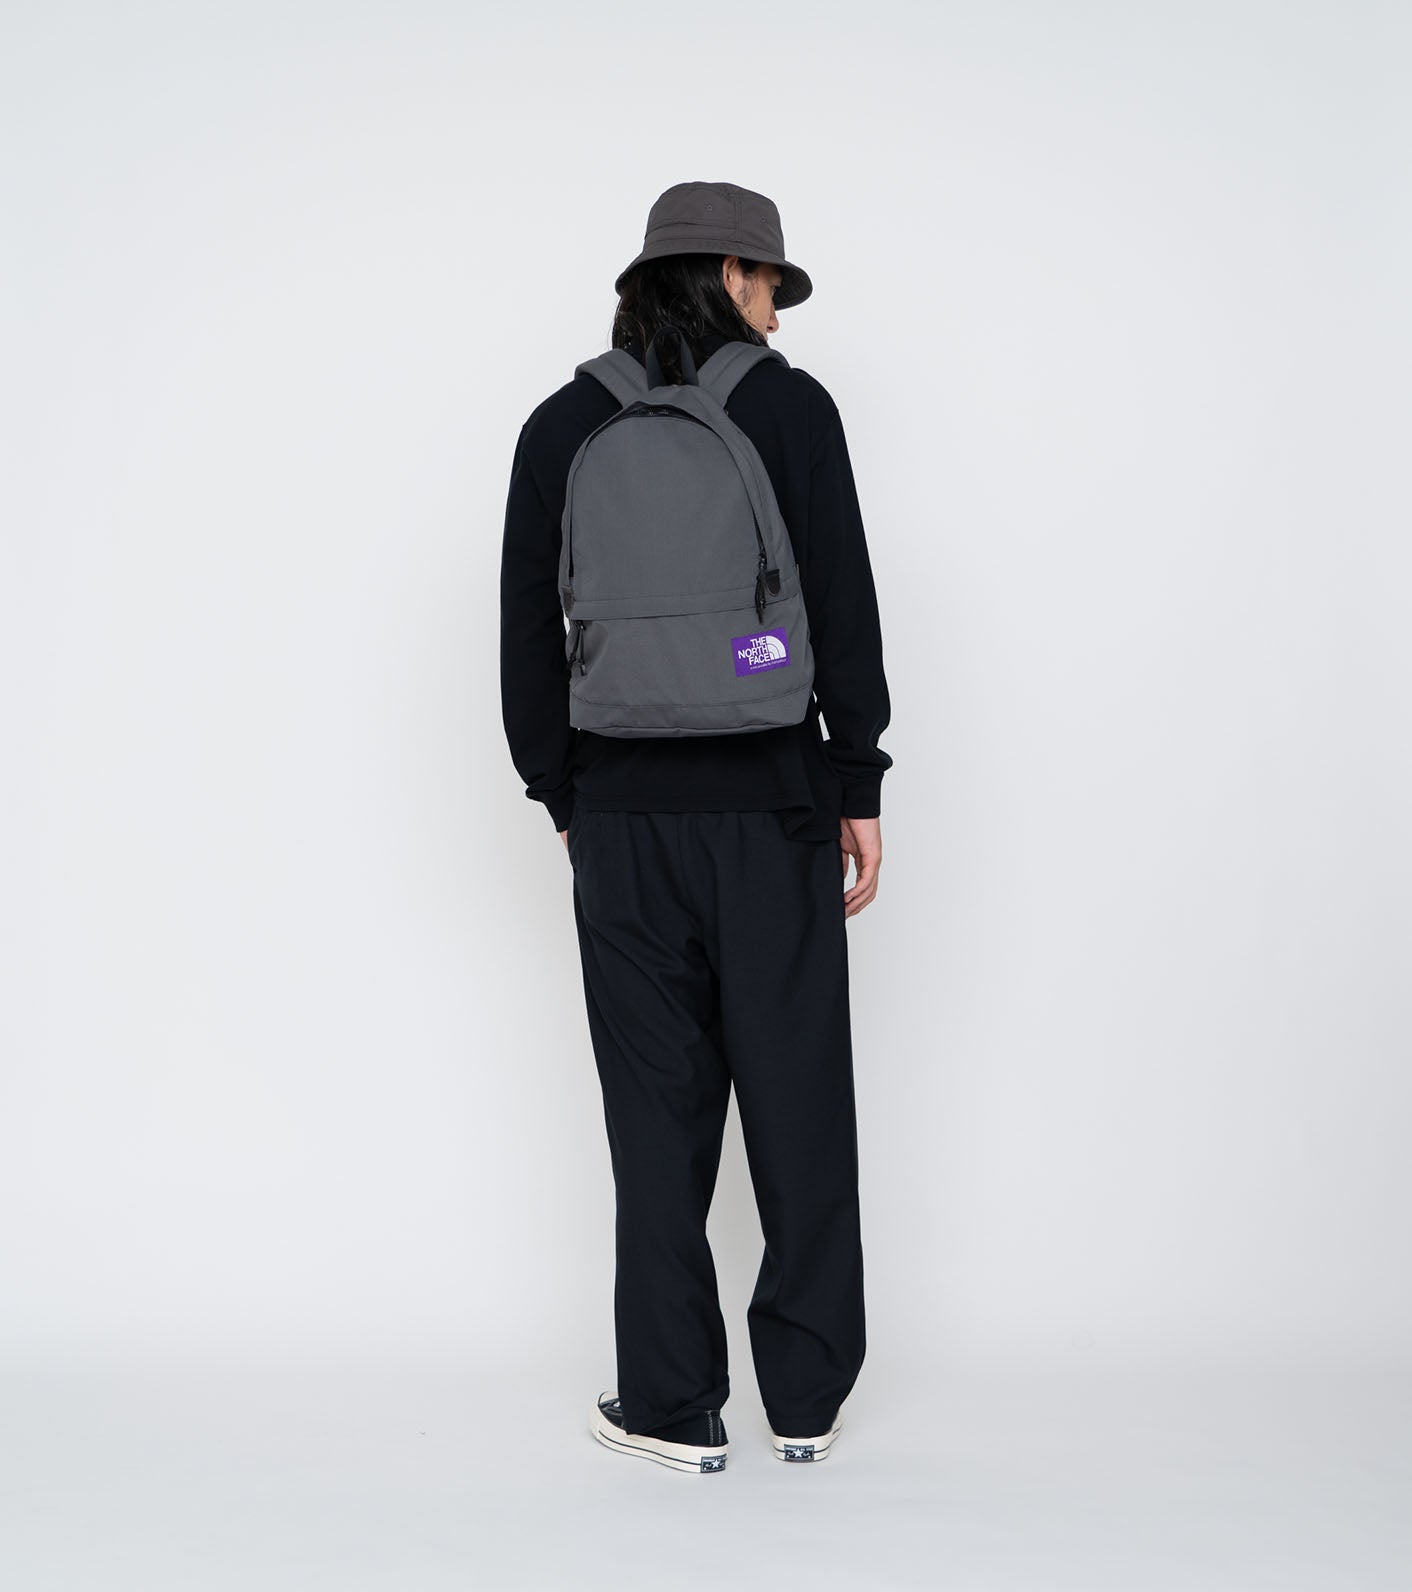 THE NORTH FACE PURPLE LABEL FieldDayPack - リュック/バックパック